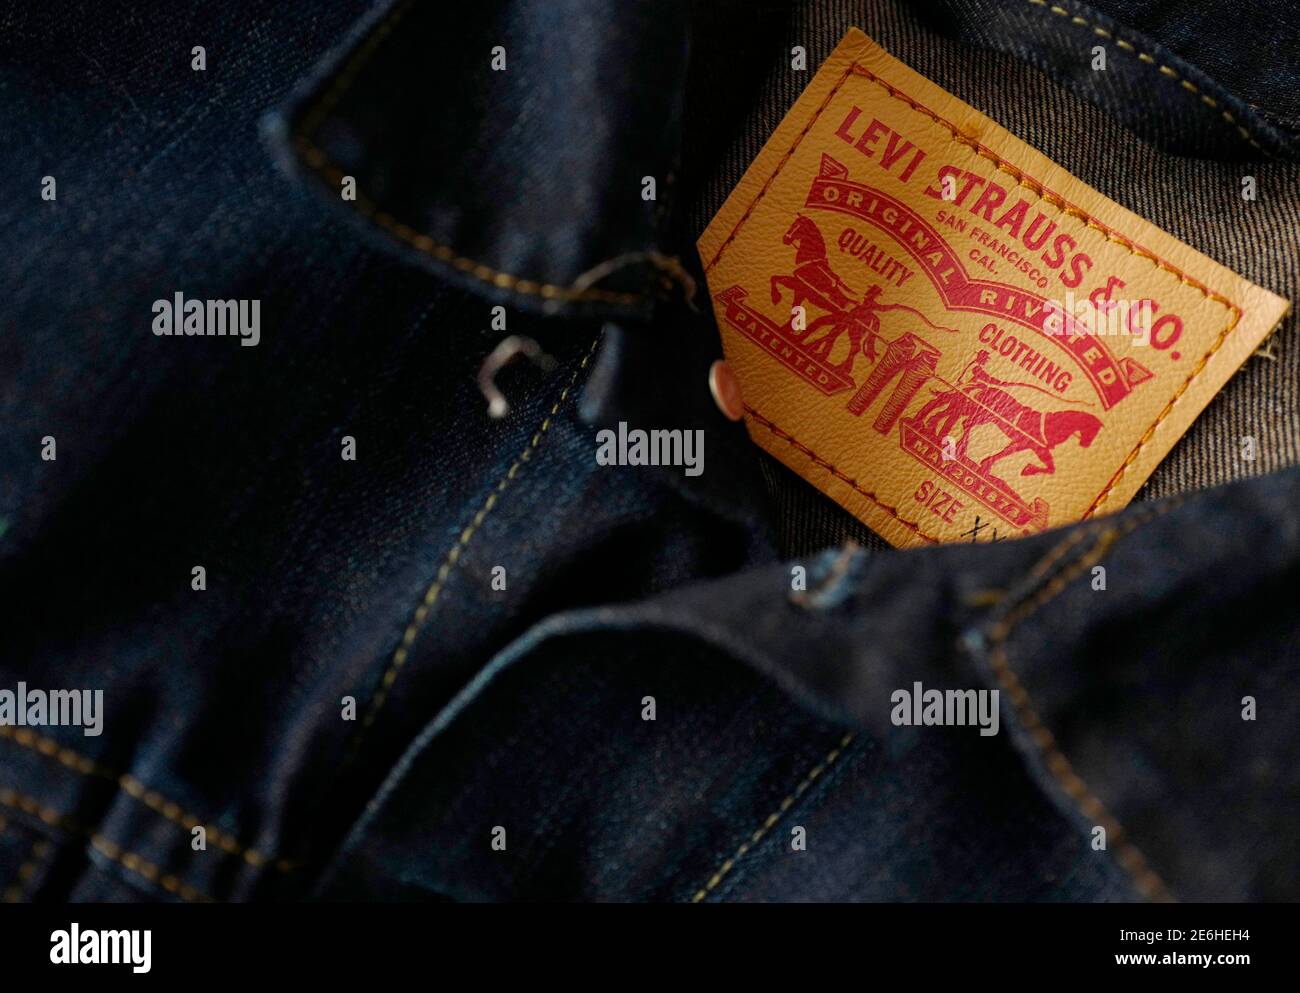 The label of a Levi's denim jacket of U.S. company Levi Strauss is  photographed at a denim store in Frankfurt, Germany, March 20, 2016.  REUTERS/Kai Pfaffenbach Stock Photo - Alamy